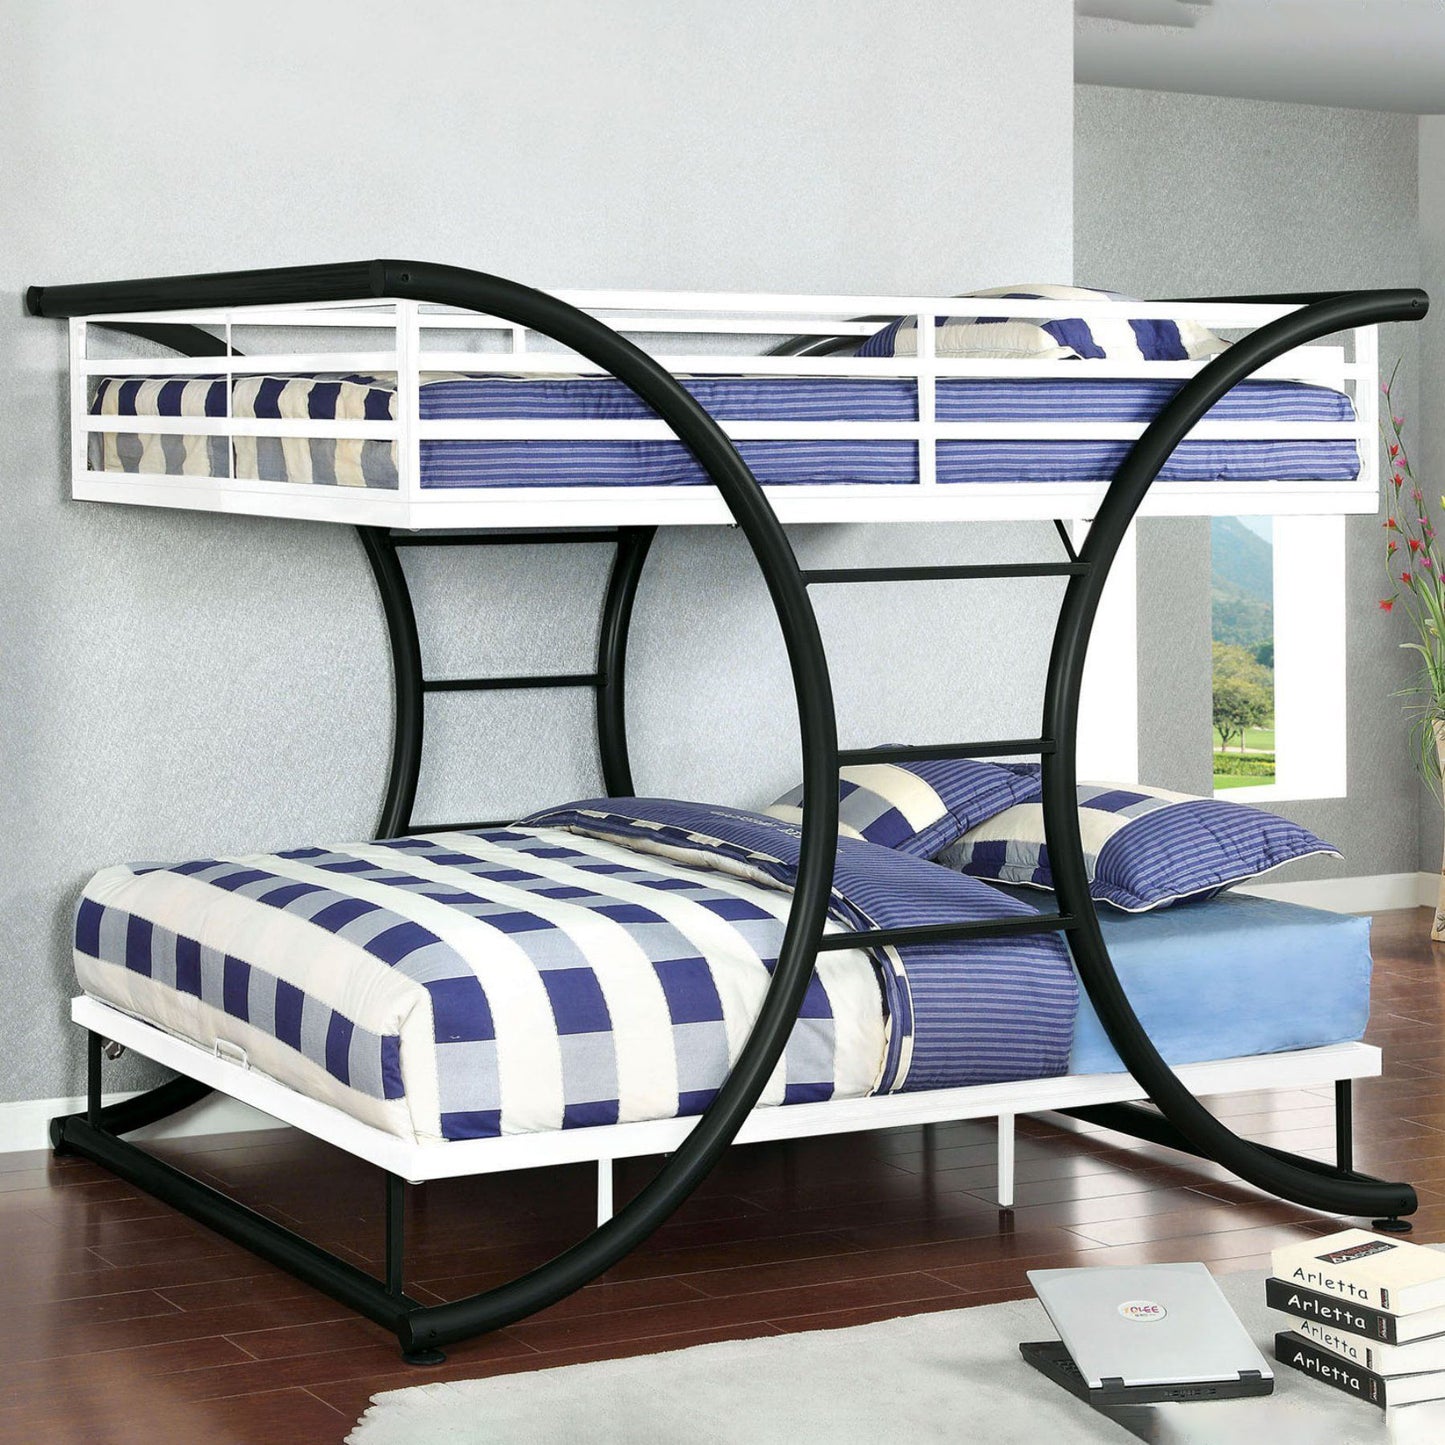 Metal Double Bed - Multi Colors - OSA16